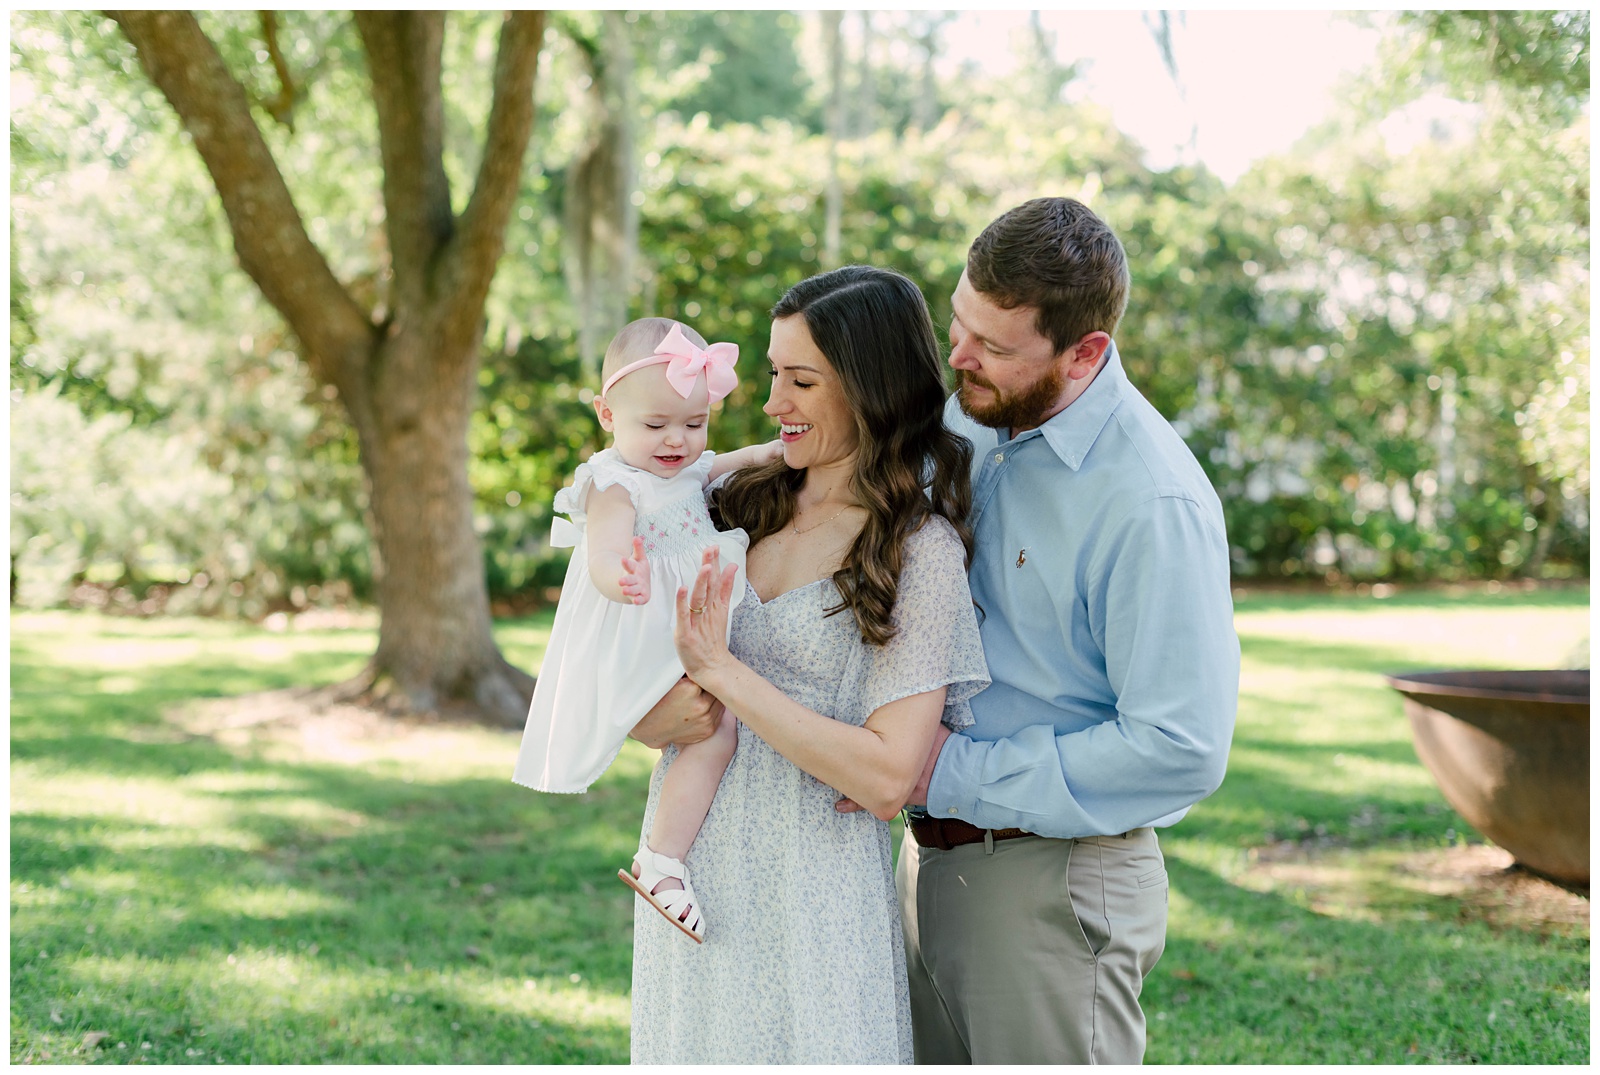 Baton Rouge Newborn Photographer - mom and dad clap hands with baby girl.